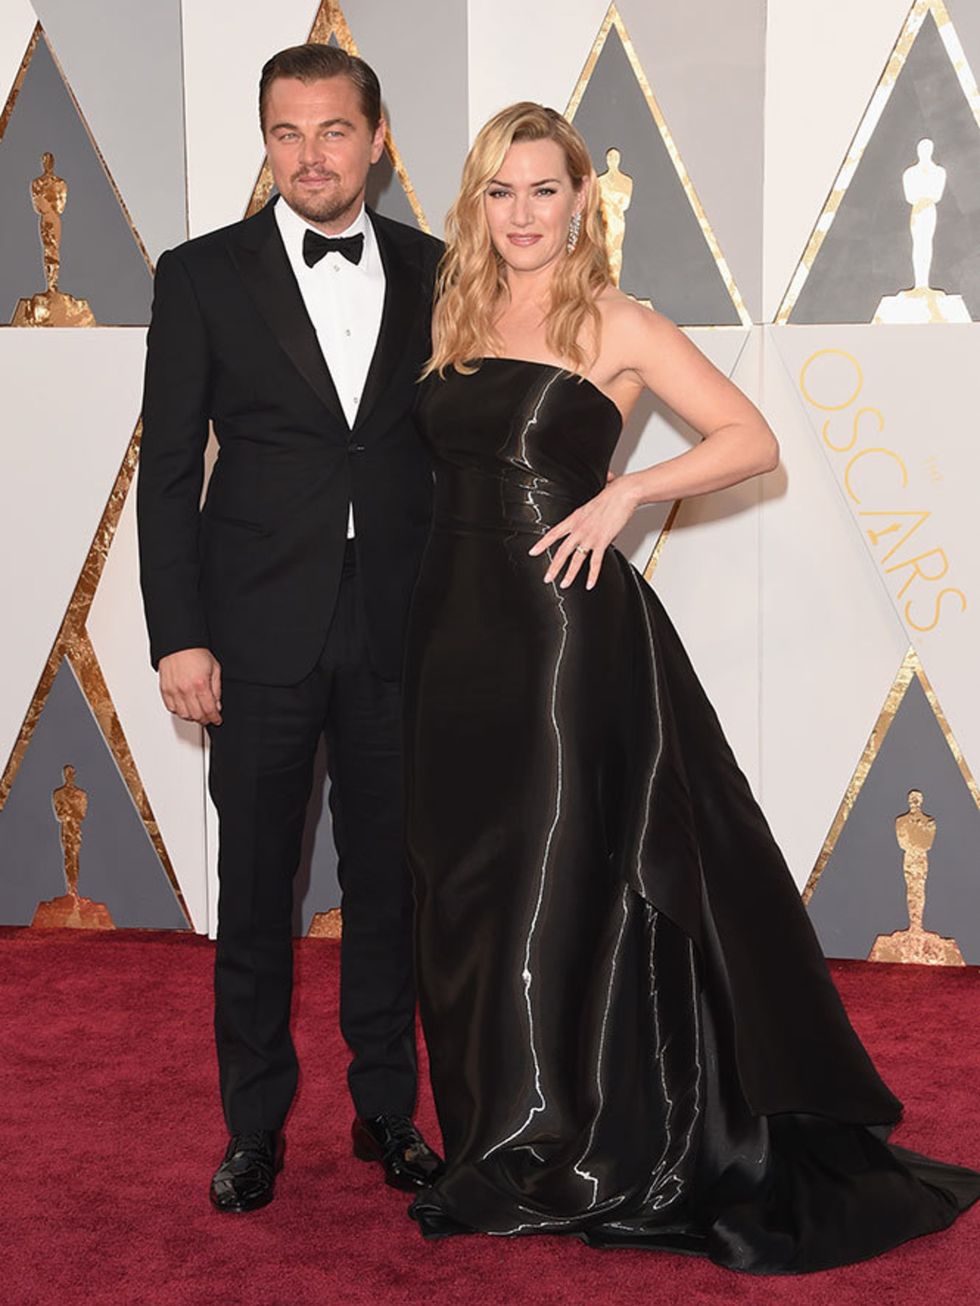 Leonardo Dicaprio and Kate Winslet at the Oscars in LA, February 2016.